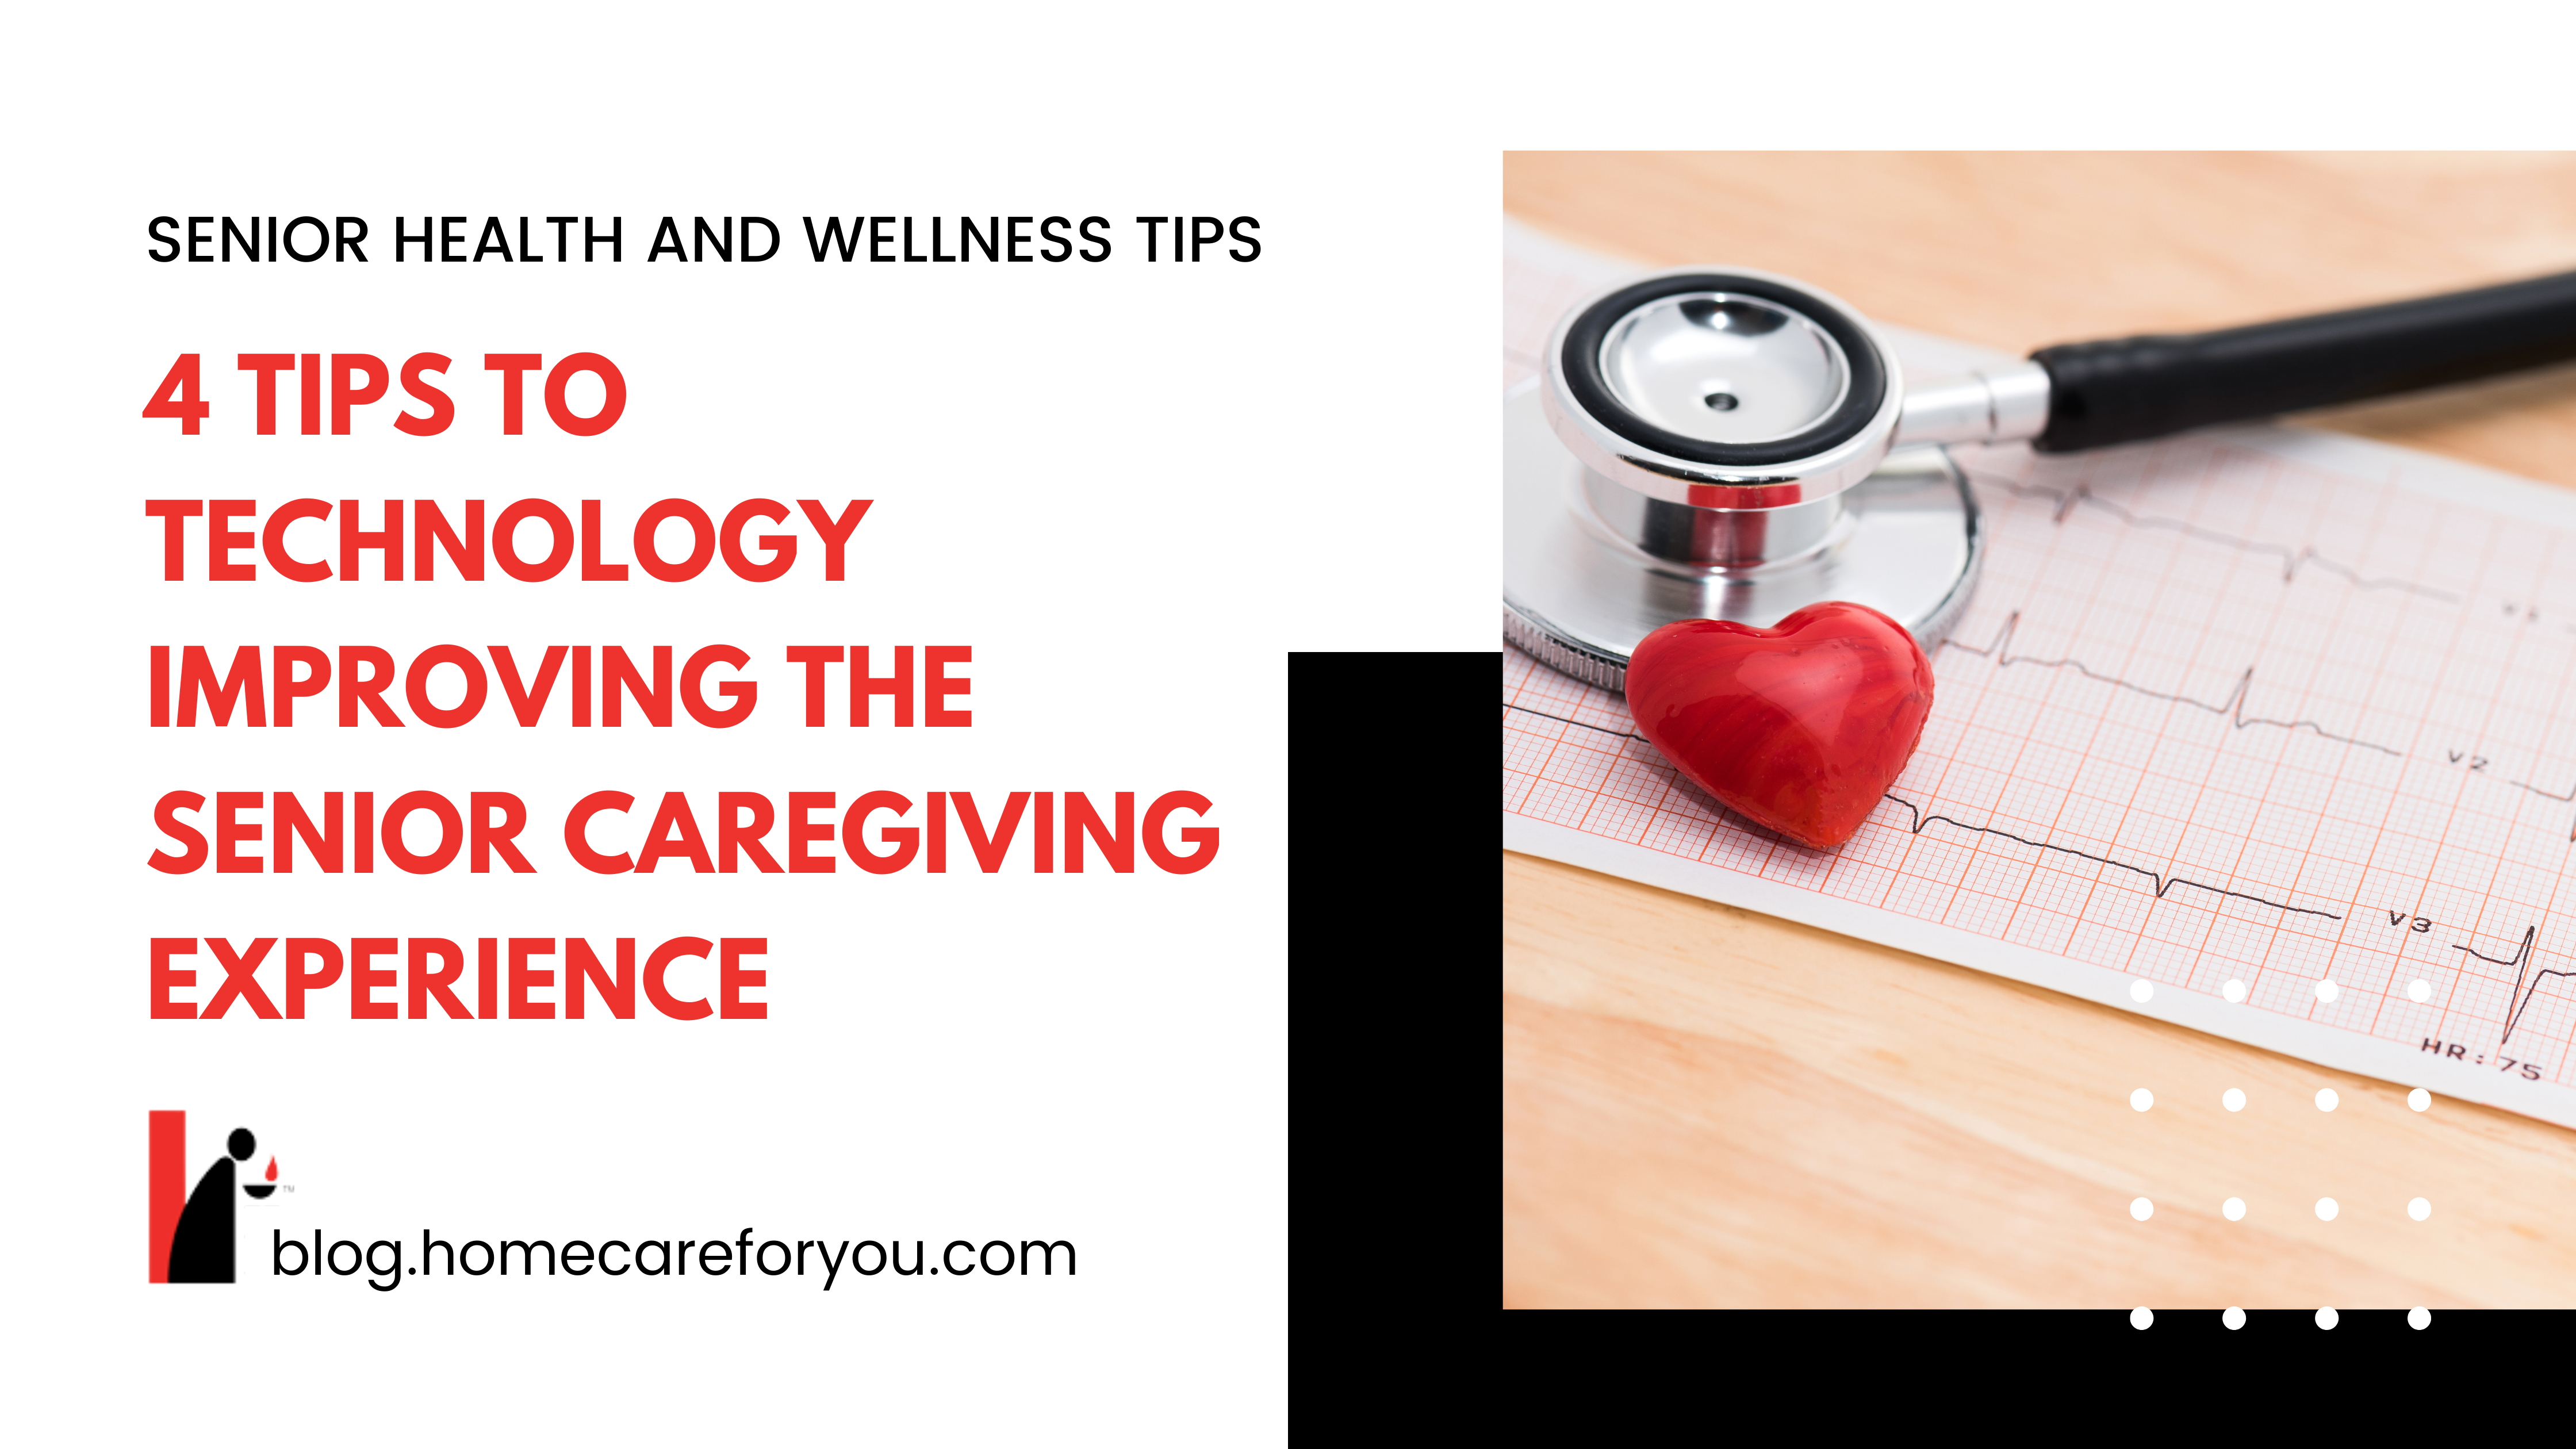 4 Tips to Technology Improving the Senior Caregiving Experience